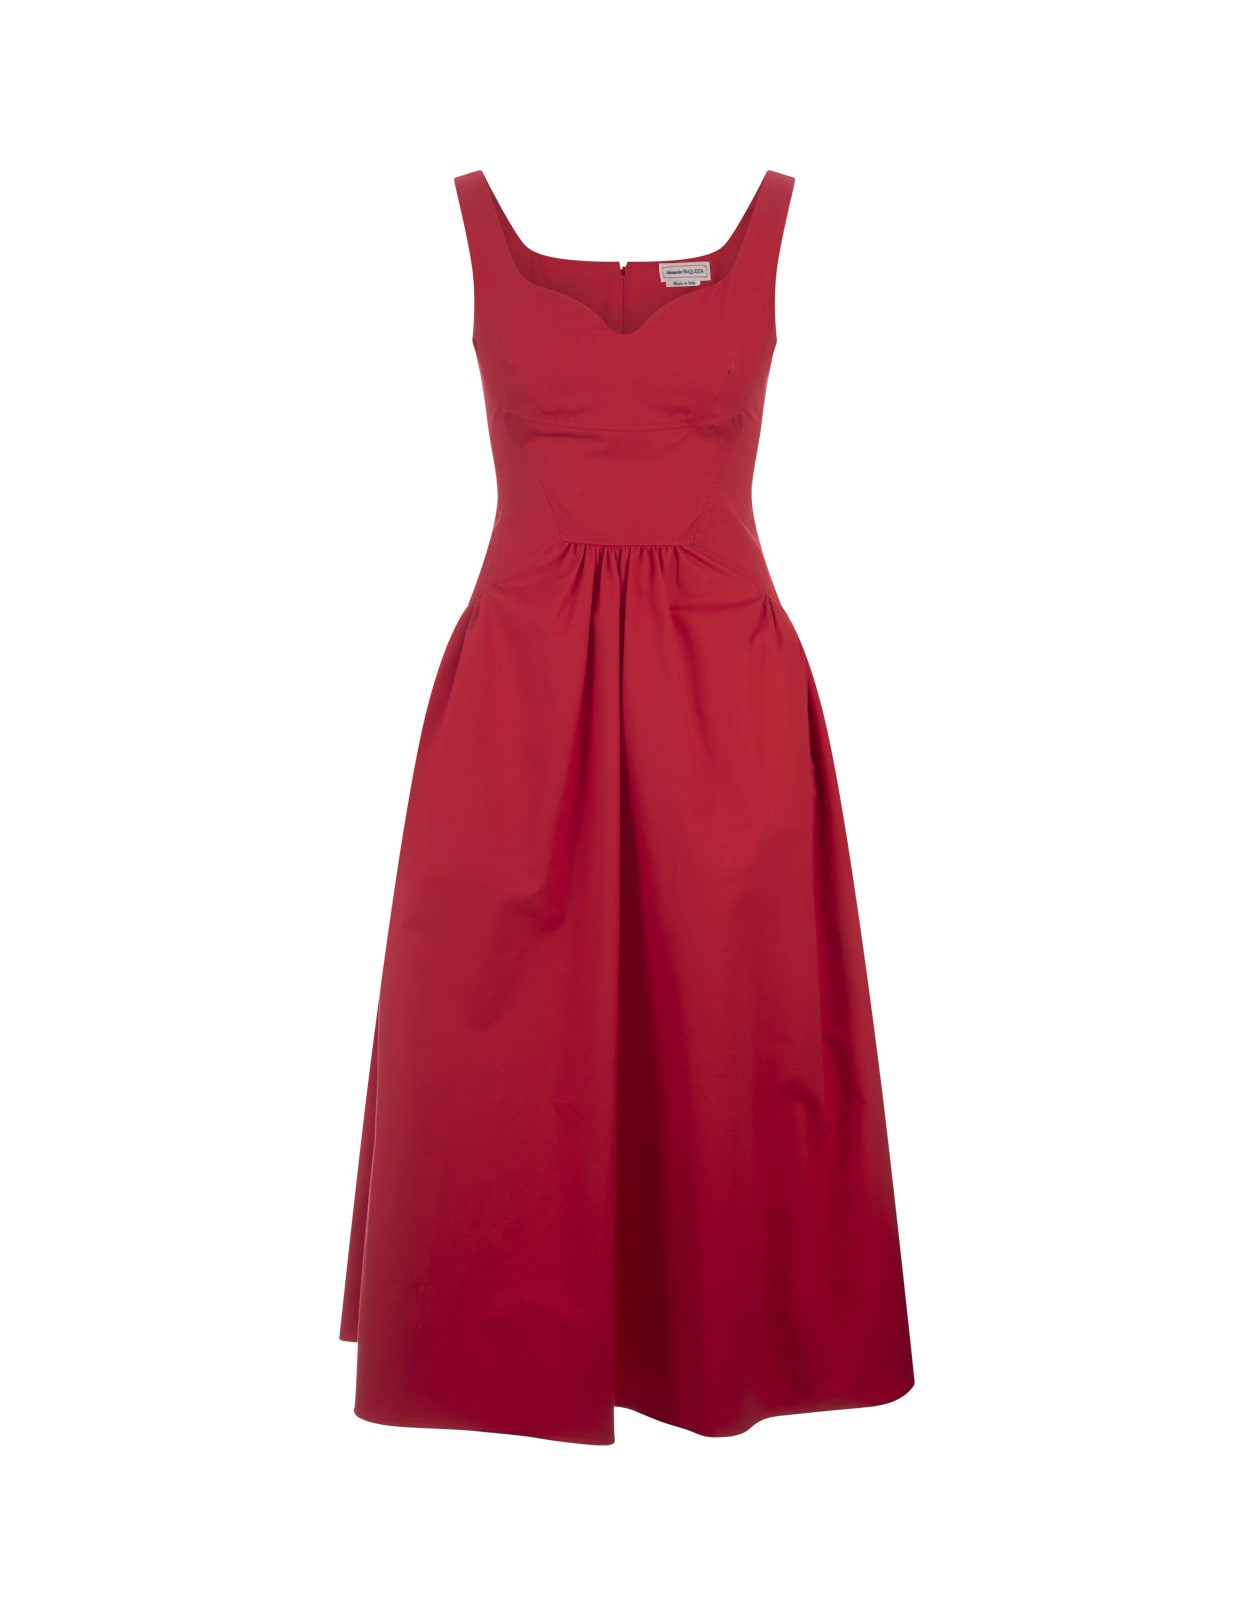 Midi Dress With Heart-shape Neckline In Lust Red